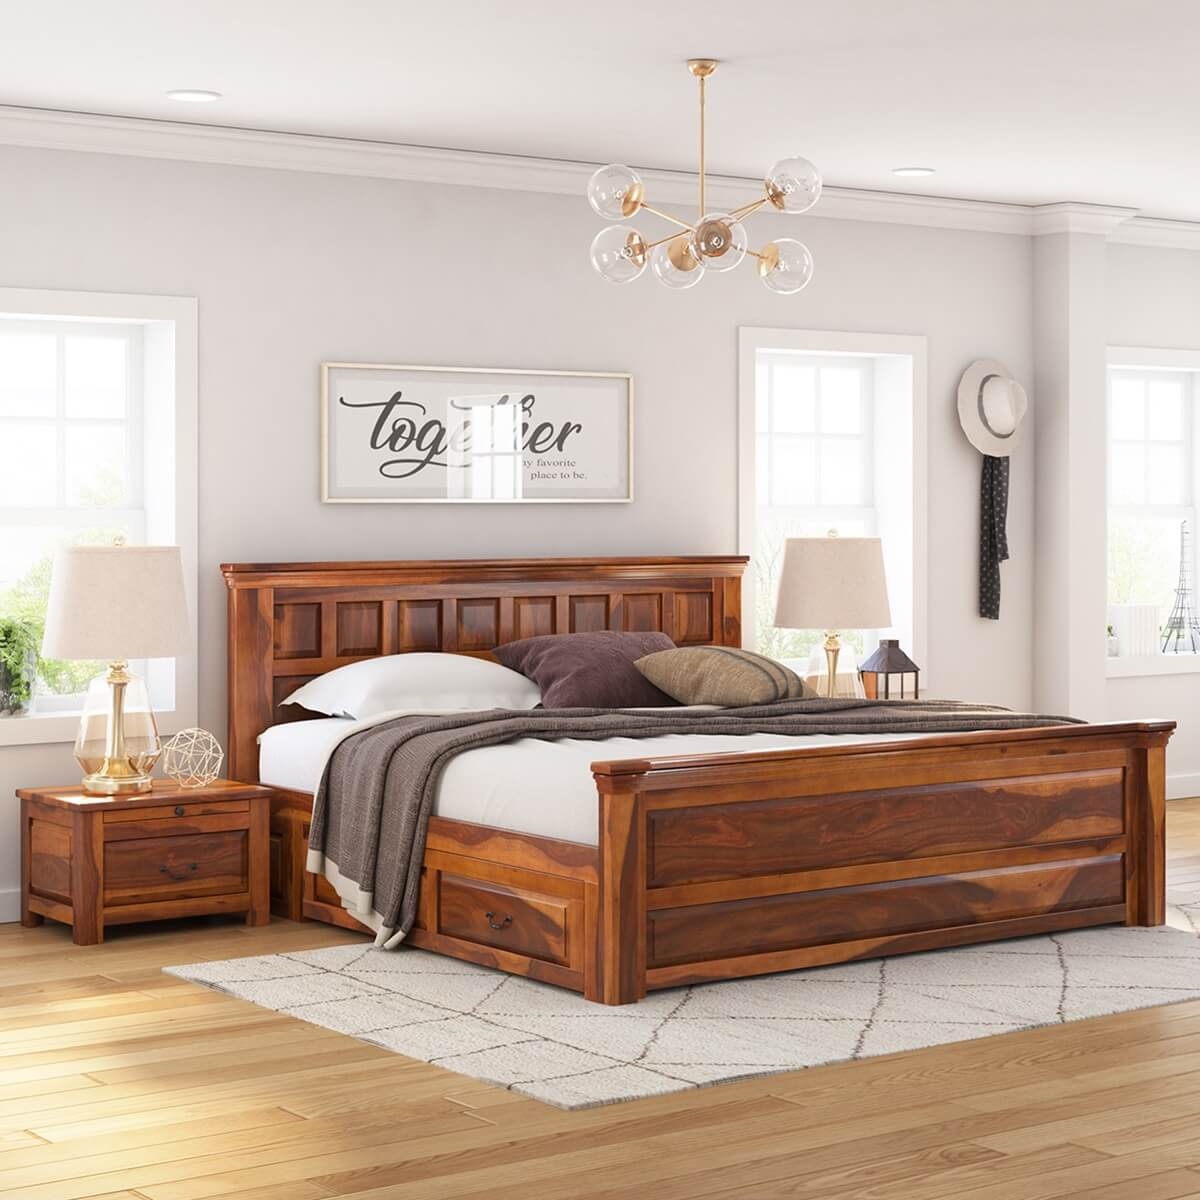 Bring Your Bedroom to Life with the Stylish Ainsley Solid Wood Sheesham Drawer Storage Bed